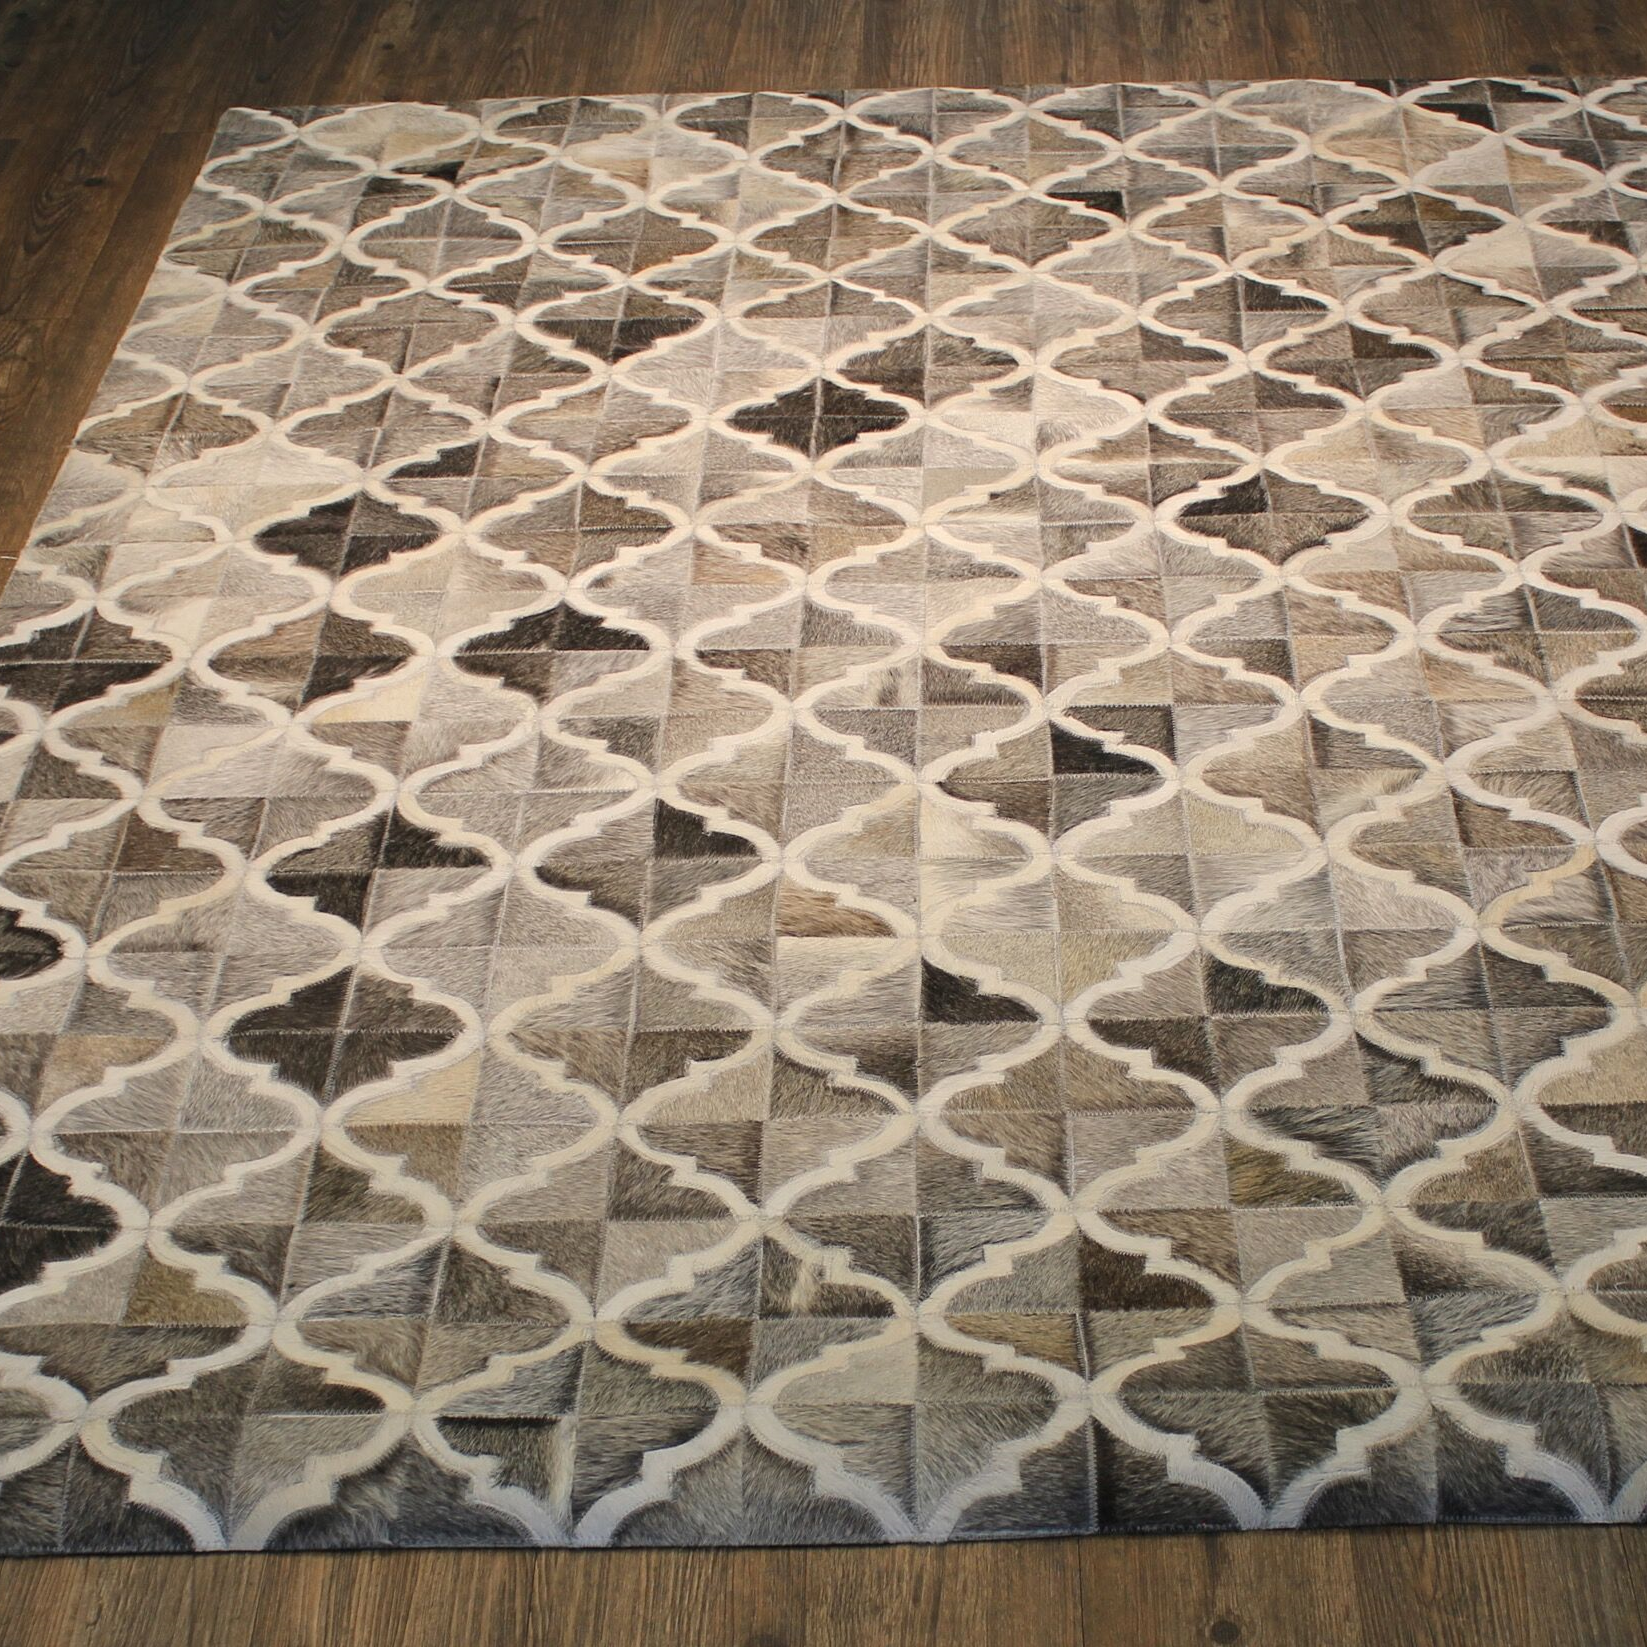 Durable Handmade Natural Leather Patchwork Cowhide PCH157 Area Rugs by Rug Factory Plus